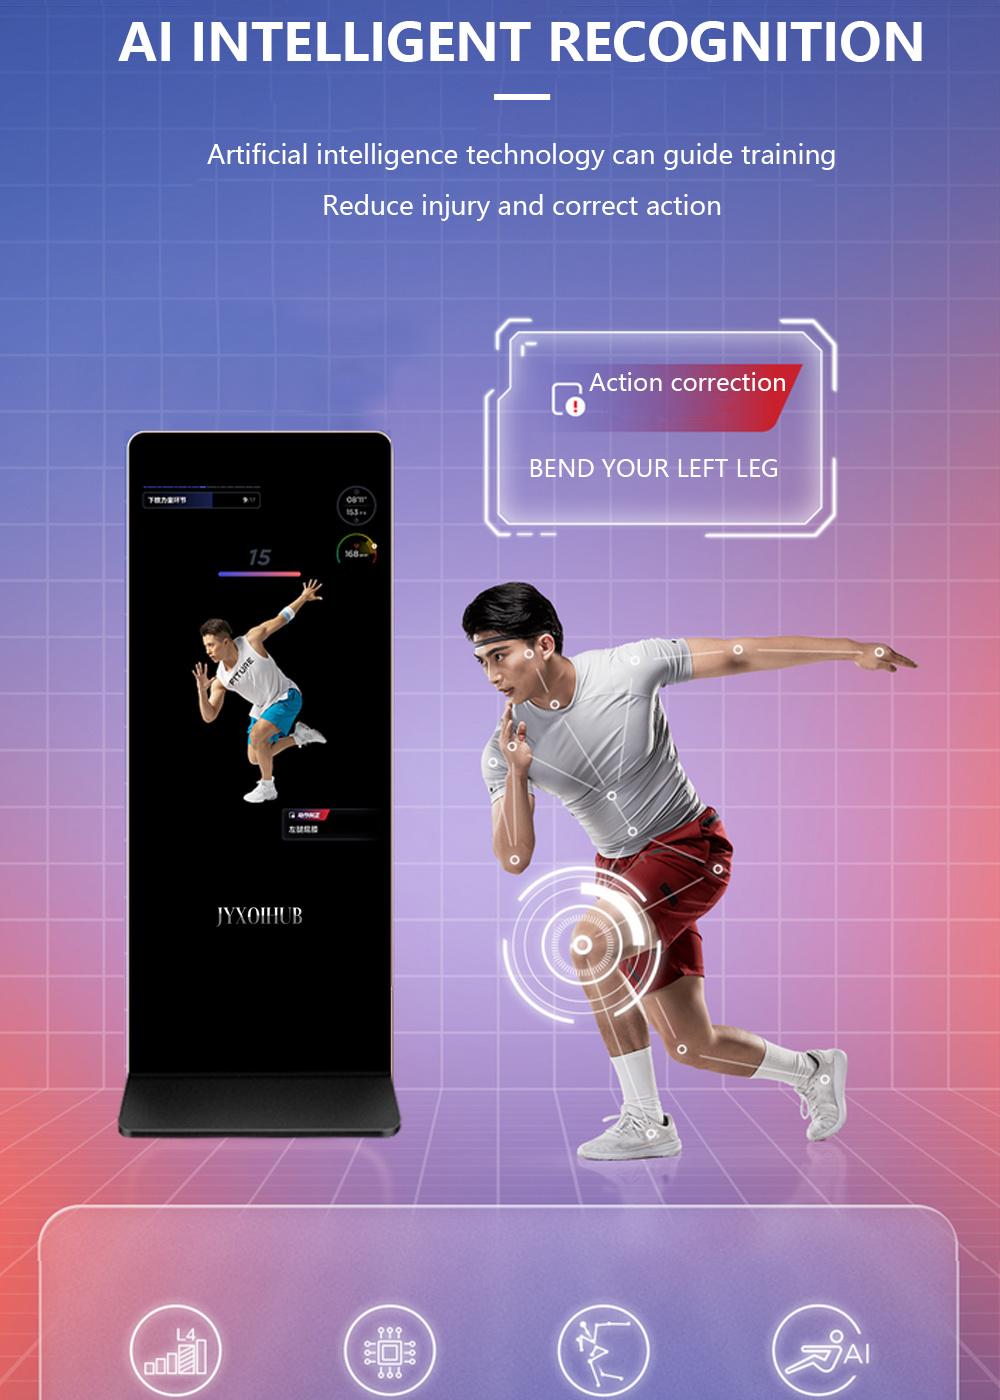 43 Inch Interactive Workout Touch Screen Smart Fitness Gym Display Magic Sensor Floor Kiosk Full Body Makeup Glass Home Smart LED Mirror